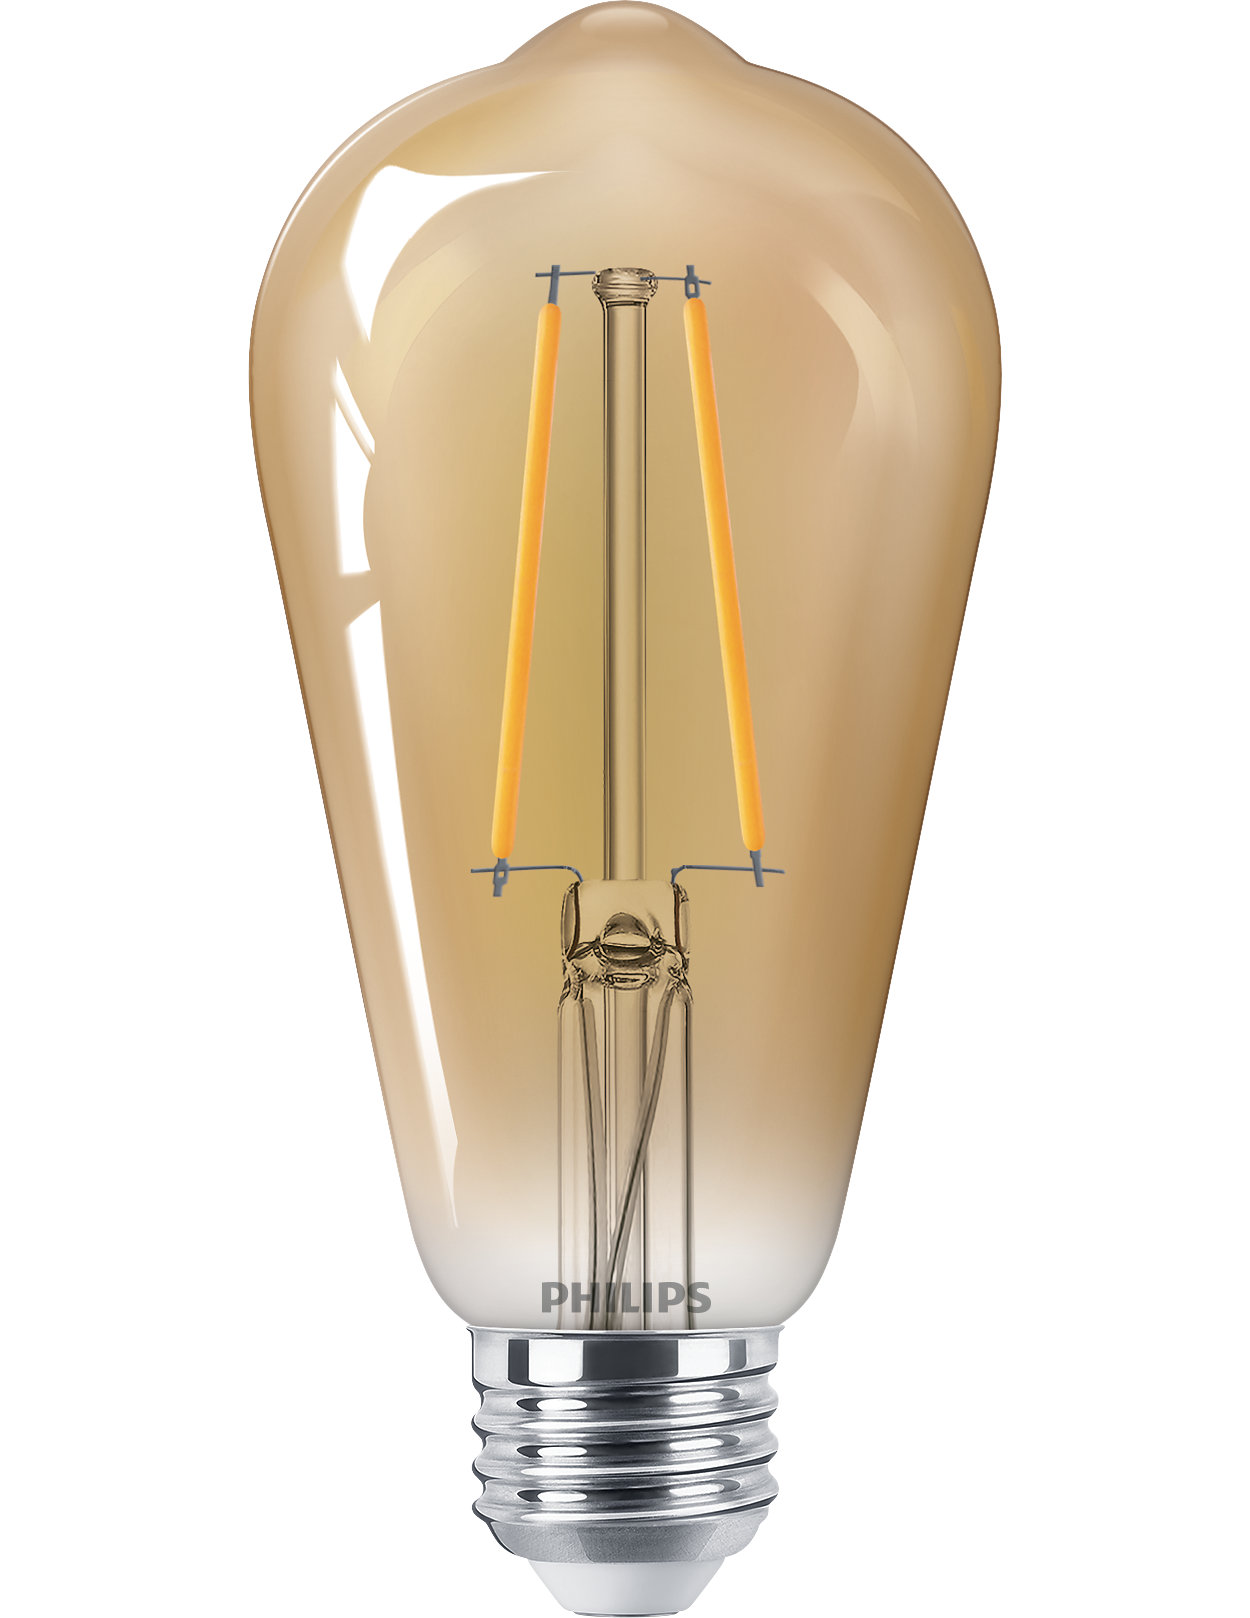 State-of-the-art LED light bulb for the home